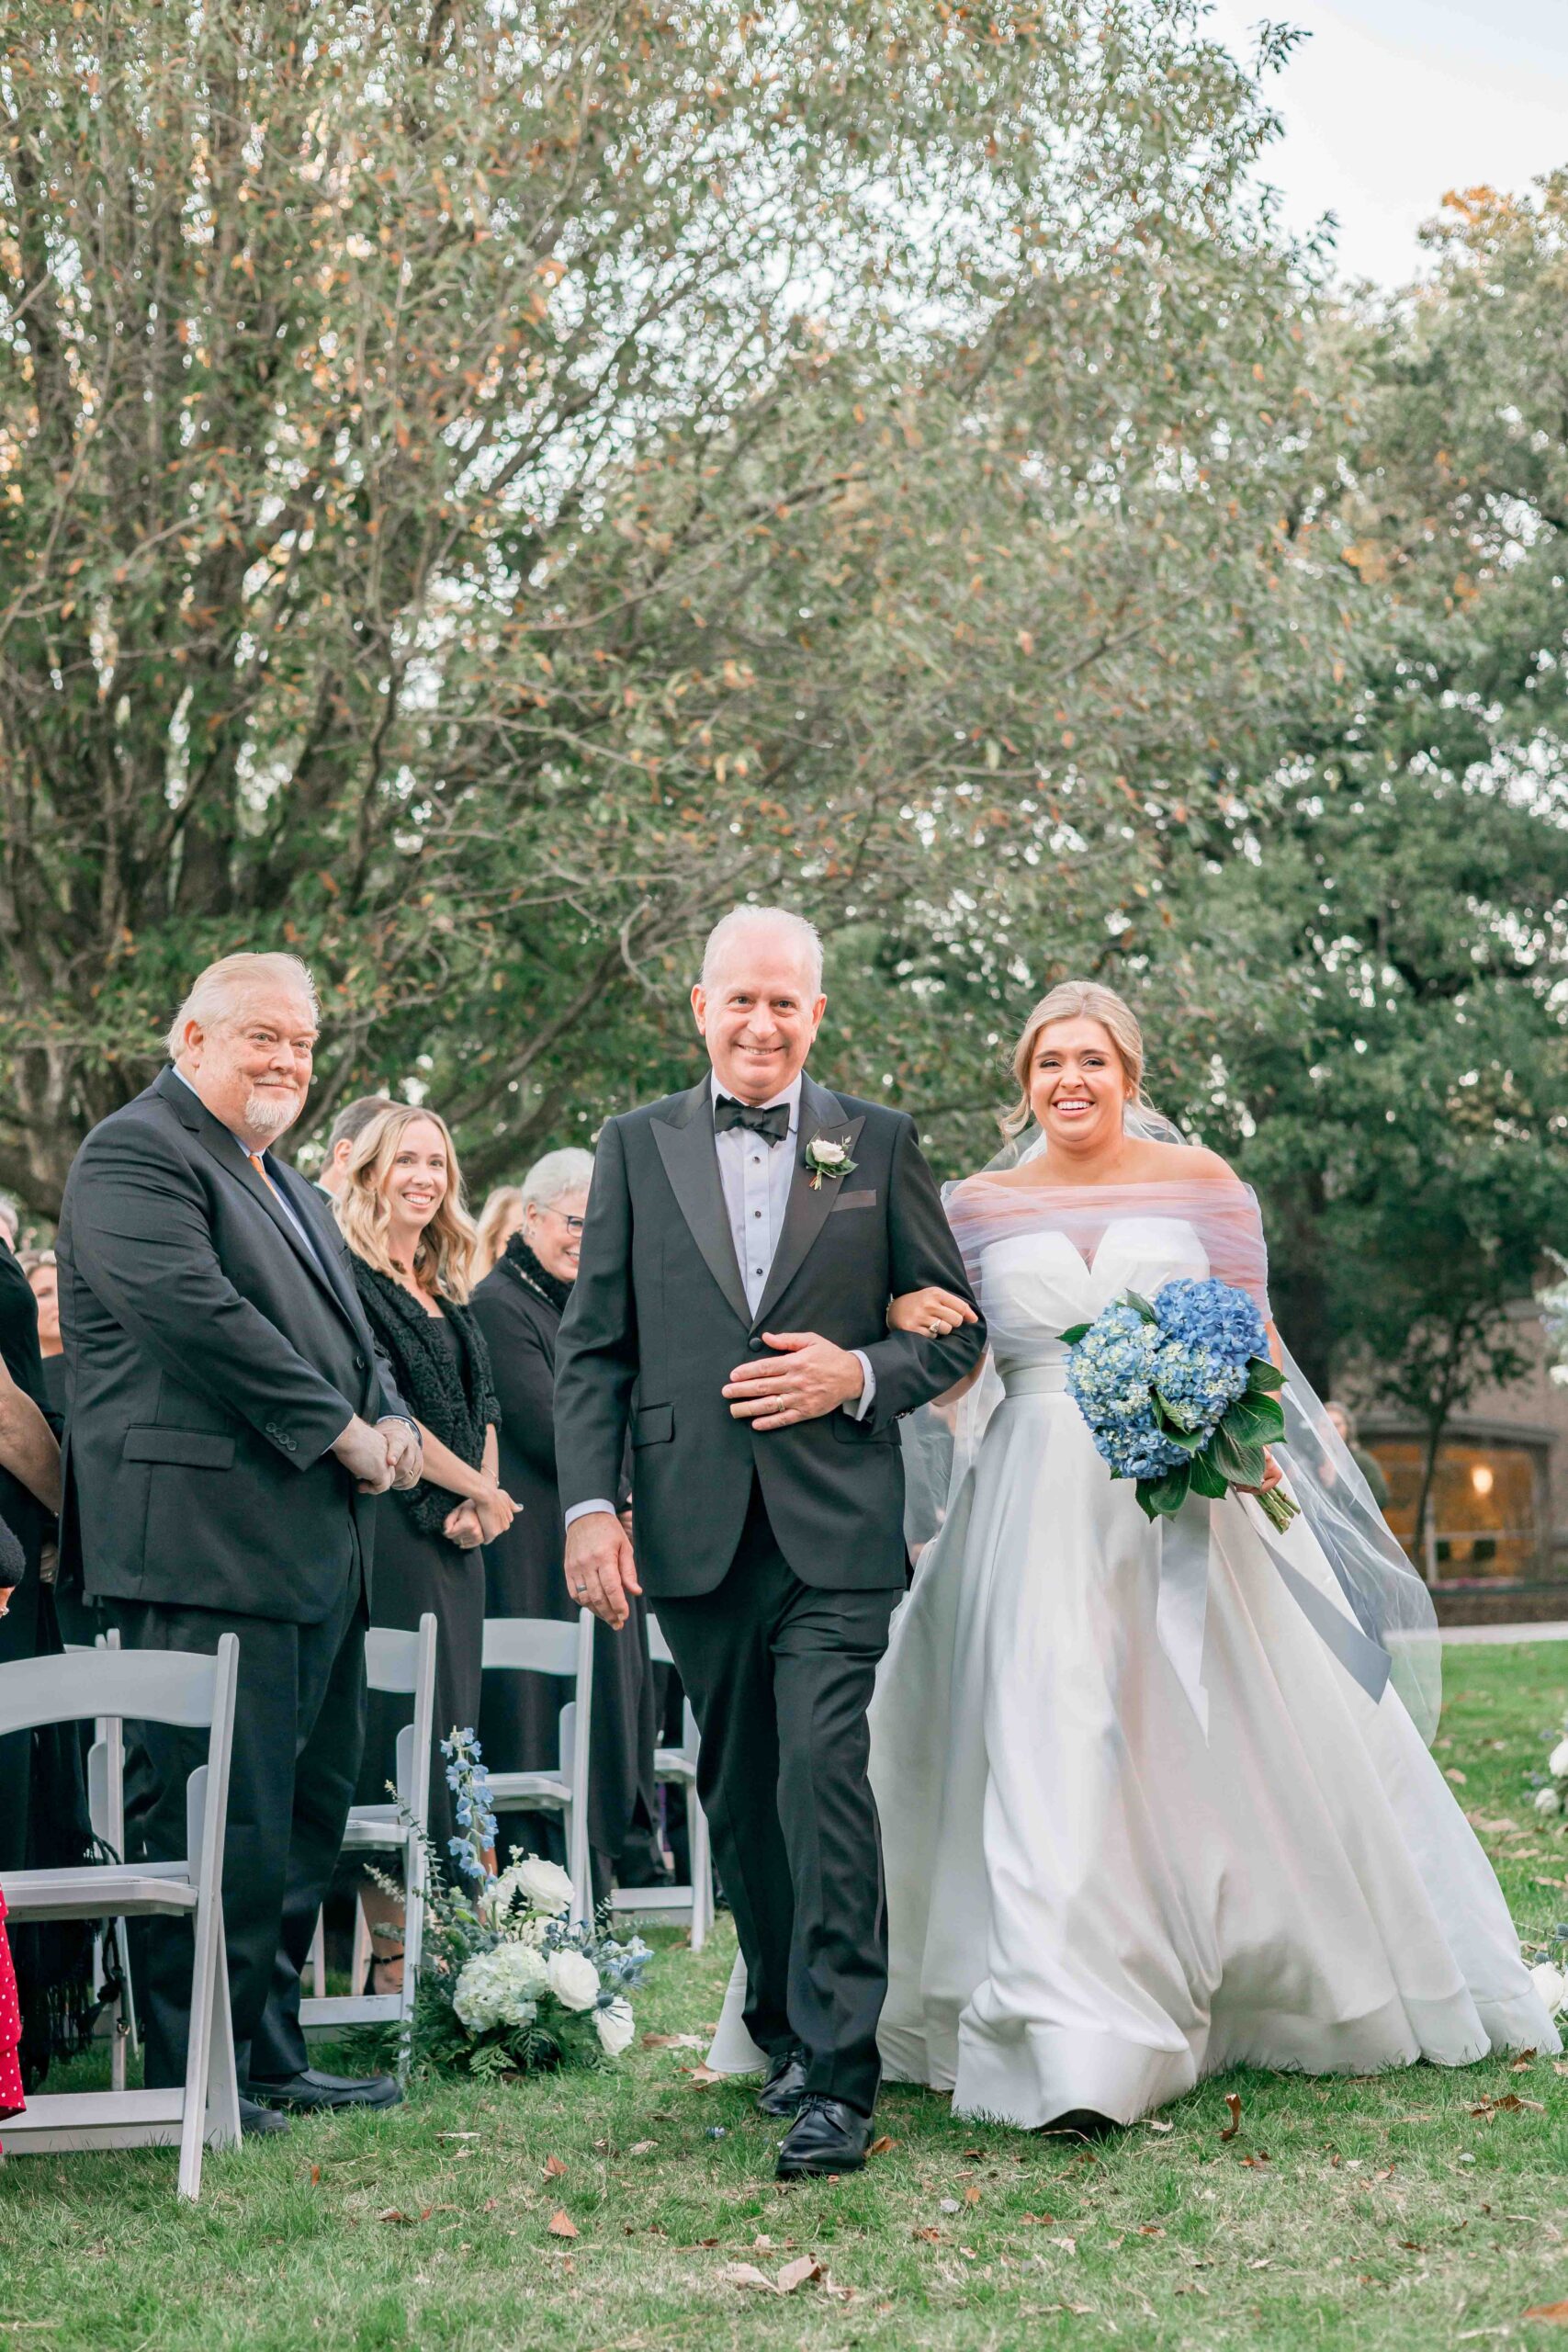 gallery of images of dad walking daughter down the aisle, while moms are emotional and guests look on.